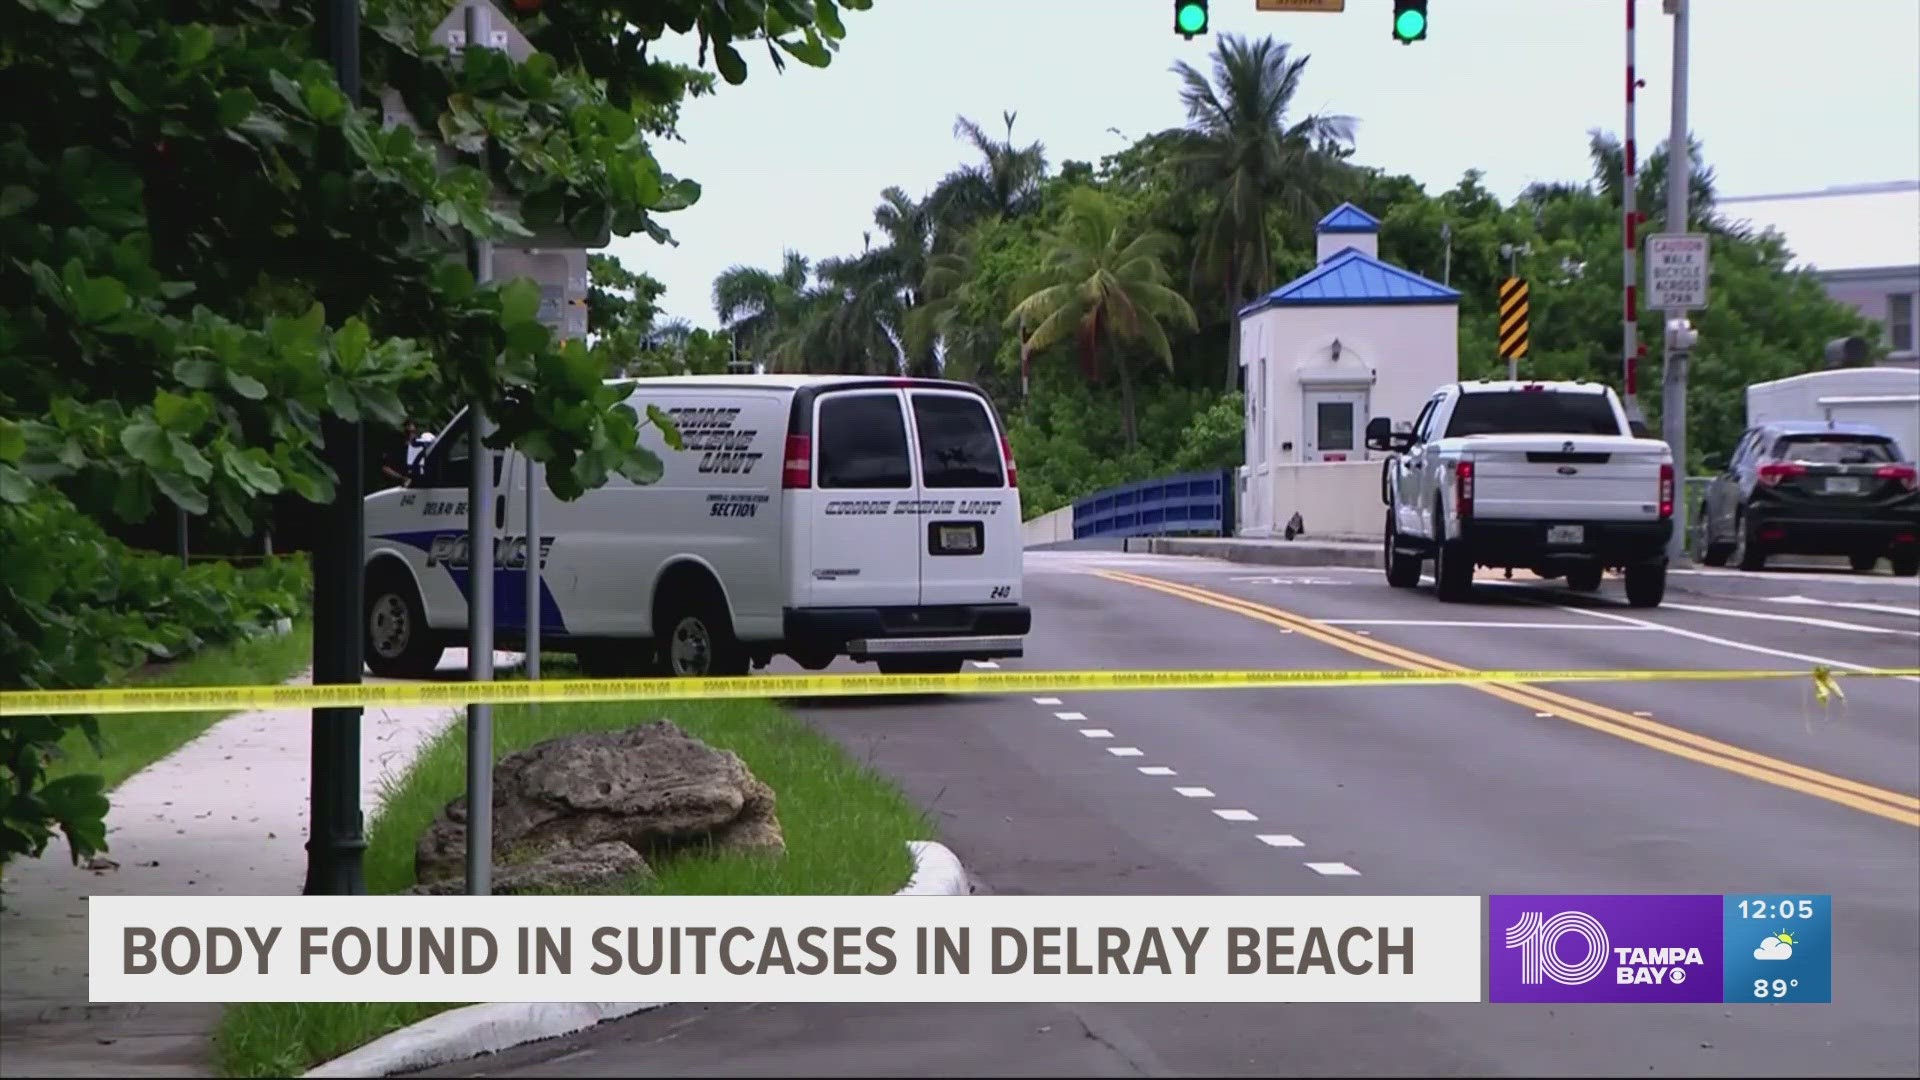 Police have revealed new details about the woman whose remains were found in Delray Beach.